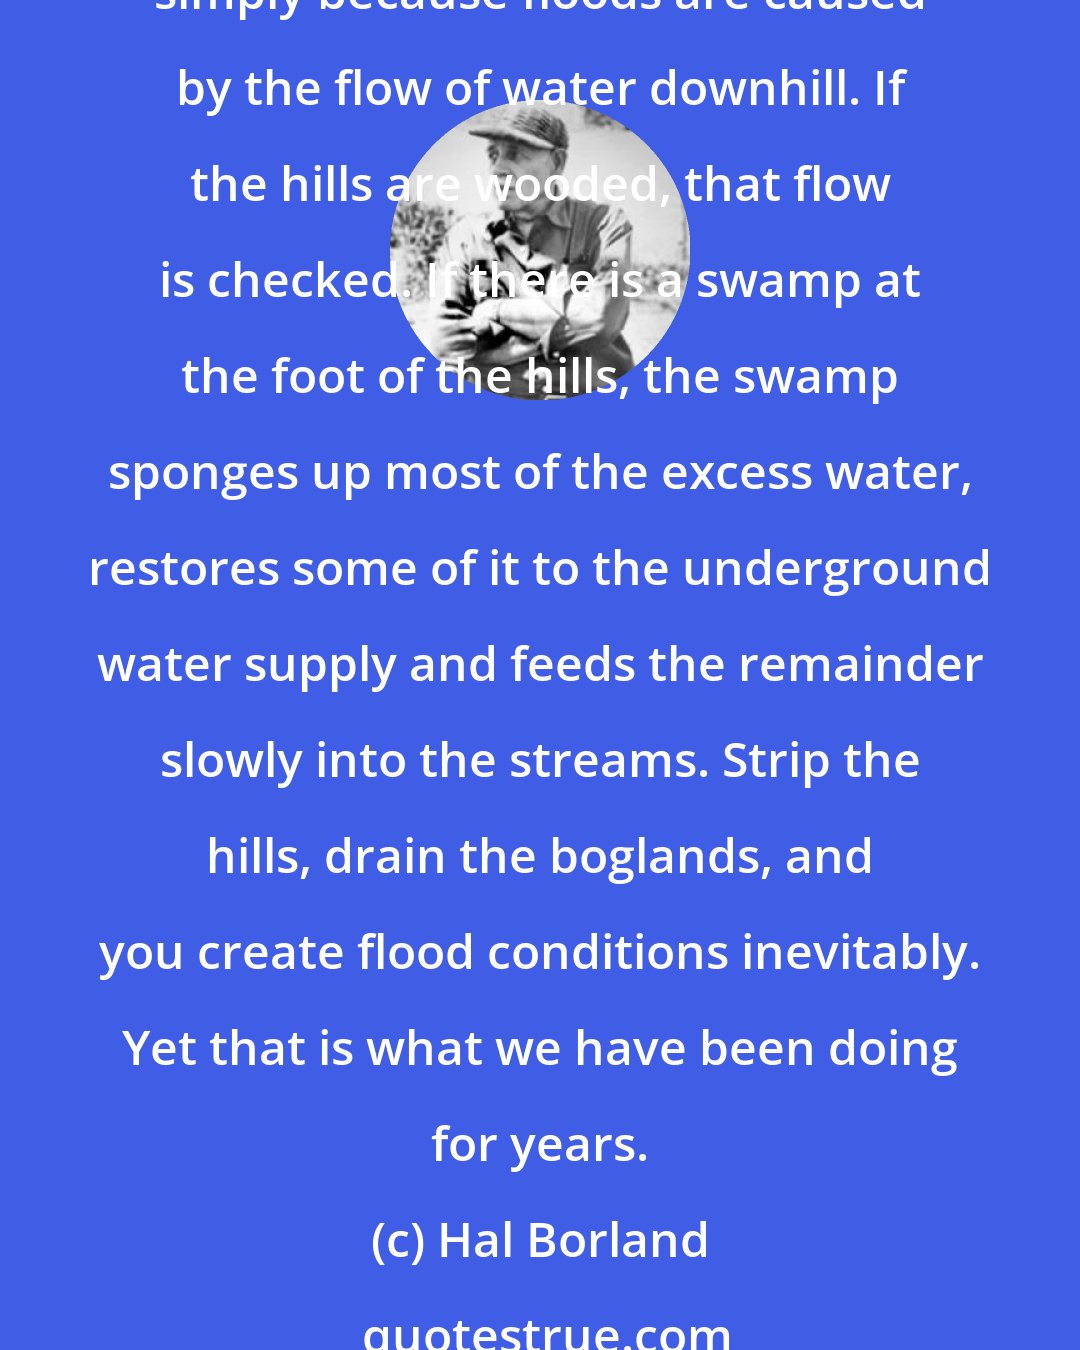 Hal Borland: When we talk of flood control, we usually think of dams and deeper river channels, to impound the waters or hurry their run-off. Yet neither is the ultimate solution, simply because floods are caused by the flow of water downhill. If the hills are wooded, that flow is checked. If there is a swamp at the foot of the hills, the swamp sponges up most of the excess water, restores some of it to the underground water supply and feeds the remainder slowly into the streams. Strip the hills, drain the boglands, and you create flood conditions inevitably. Yet that is what we have been doing for years.